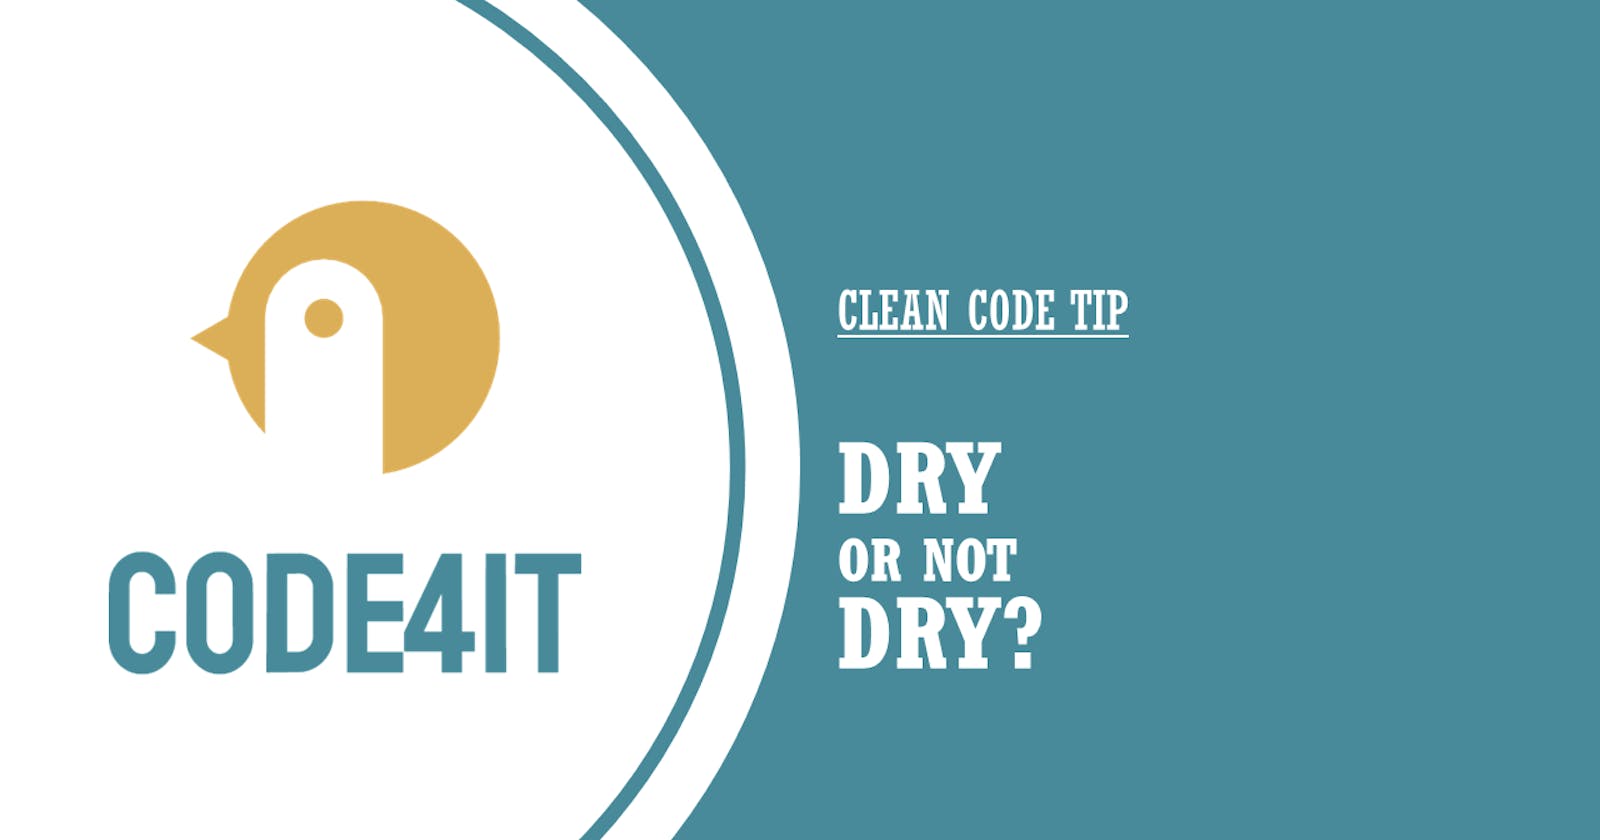 Clean Code Tip: DRY or not DRY?